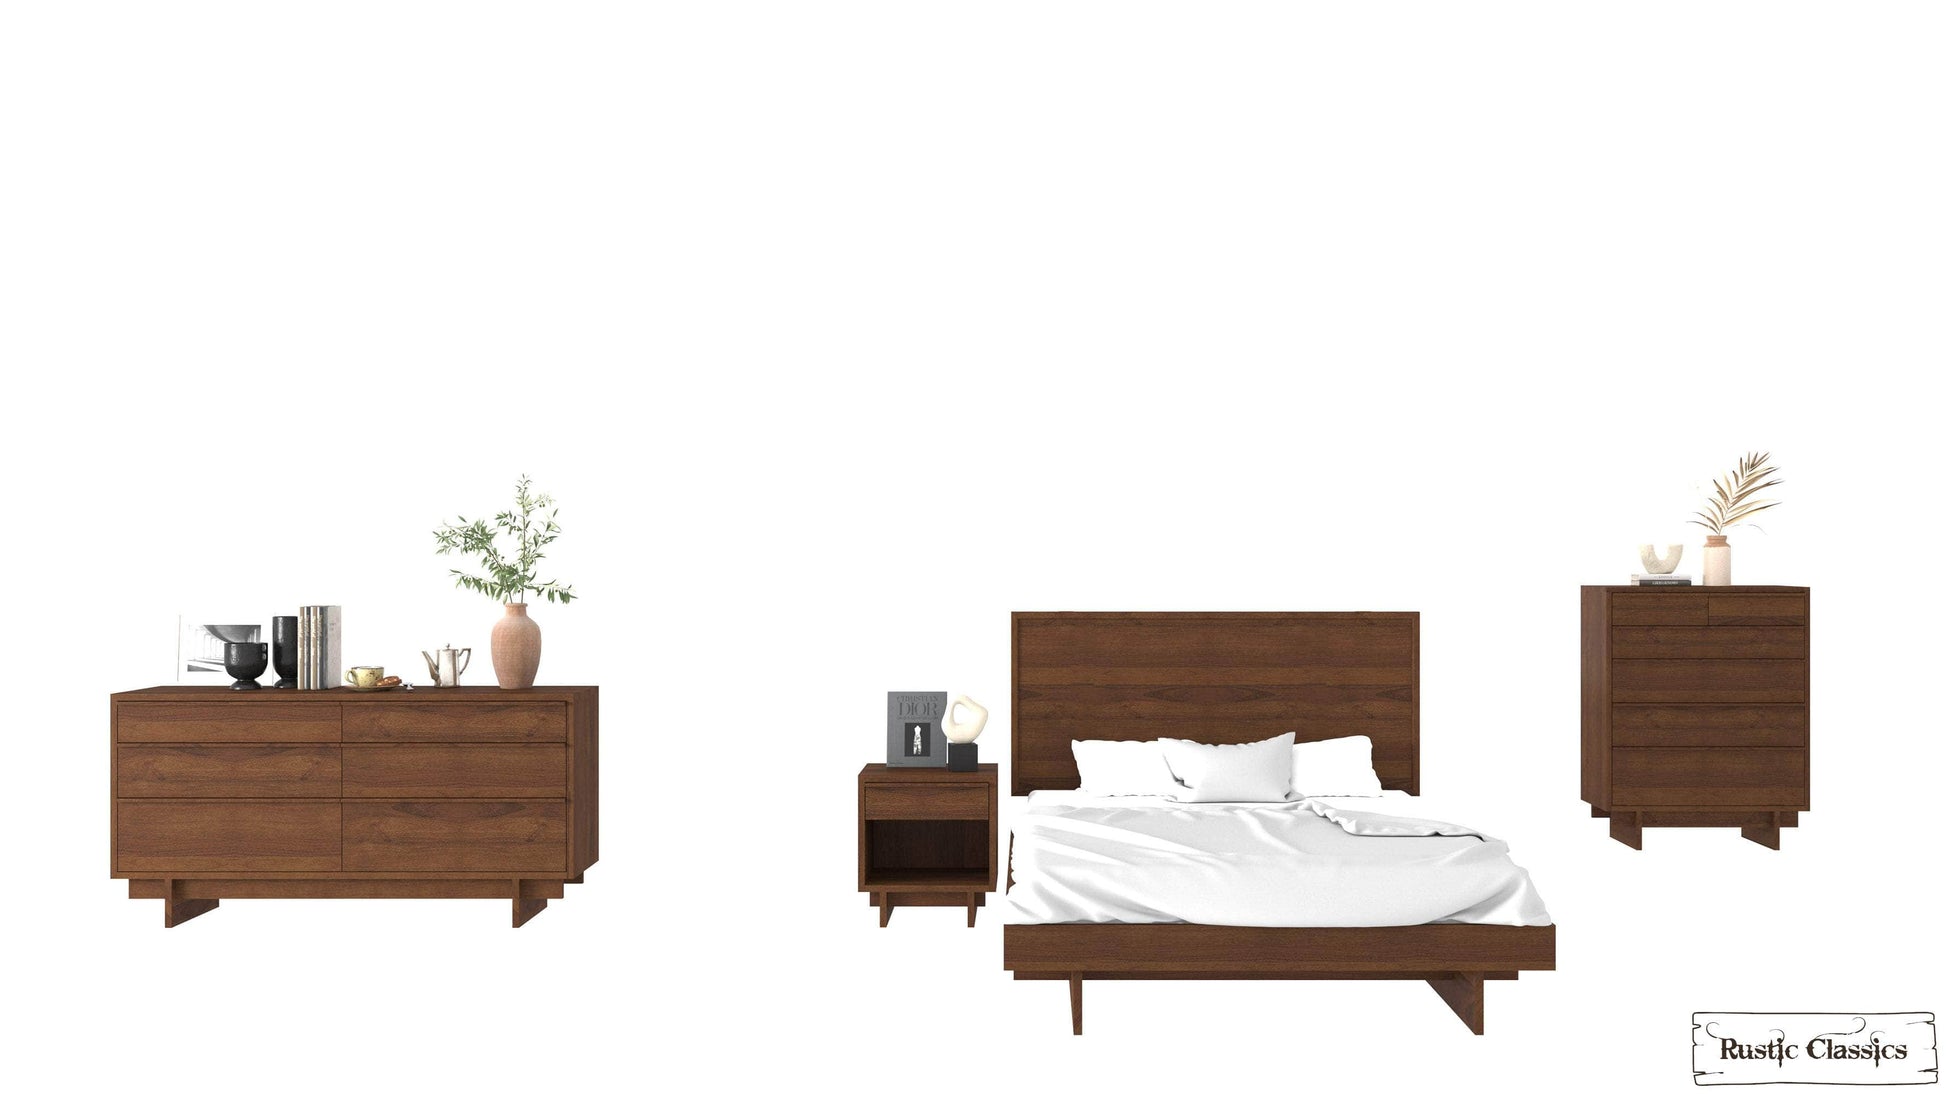 Pending - Rustic Classics Jasper 4 Piece Reclaimed Wood Platform Bedroom Furniture Set in Brown - Available in 2 Sizes